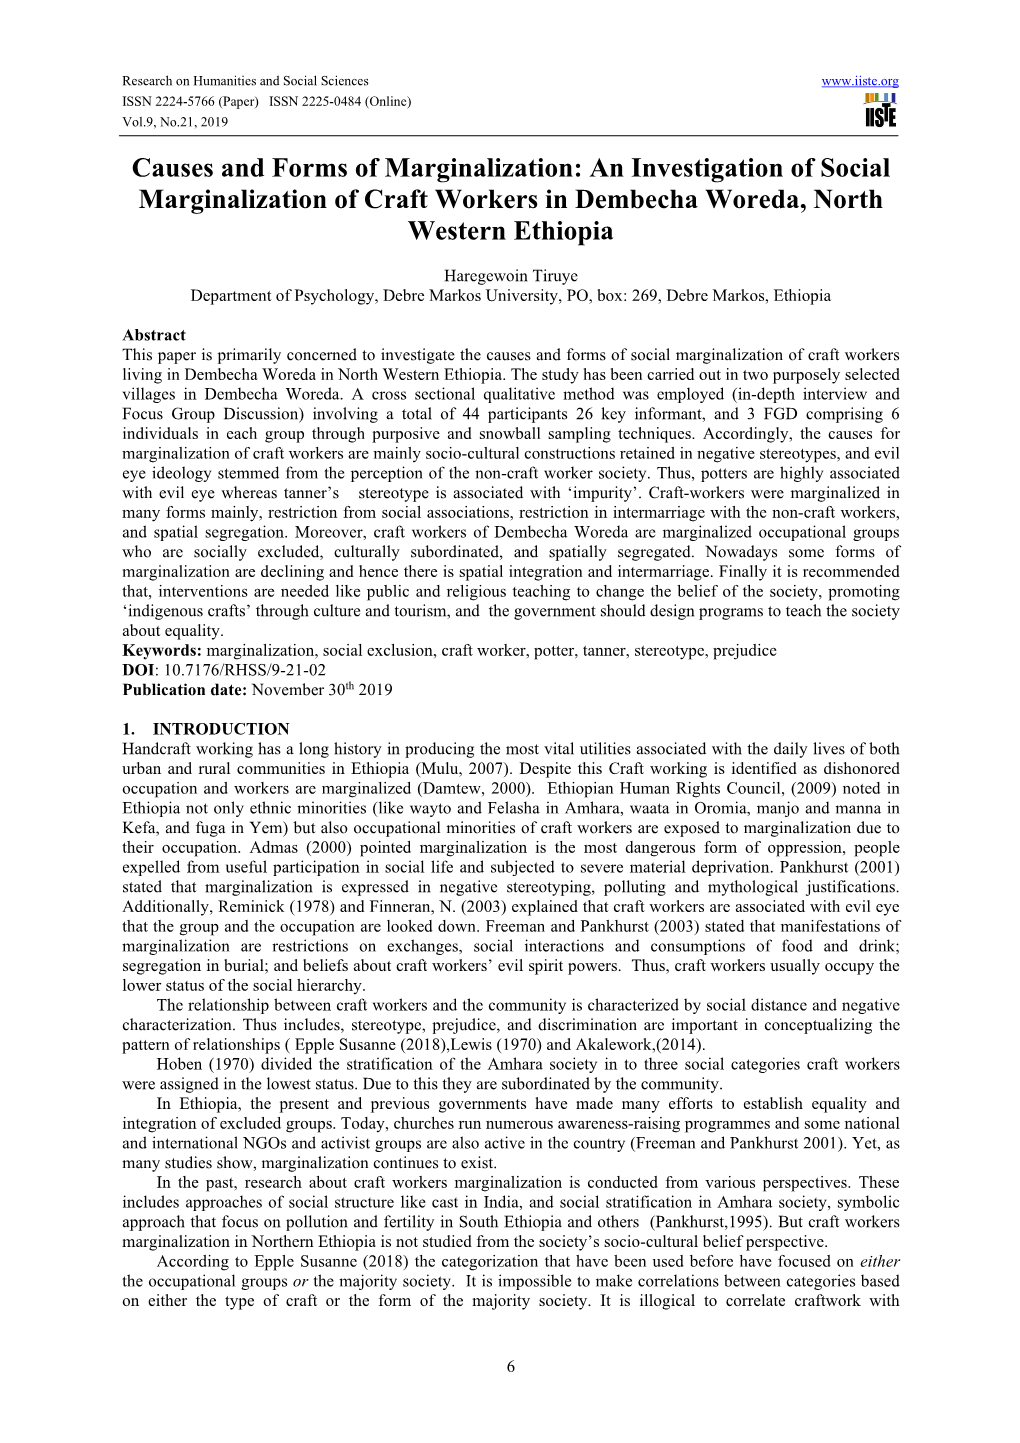 Causes and Forms of Marginalization: an Investigation of Social Marginalization of Craft Workers in Dembecha Woreda, North Western Ethiopia